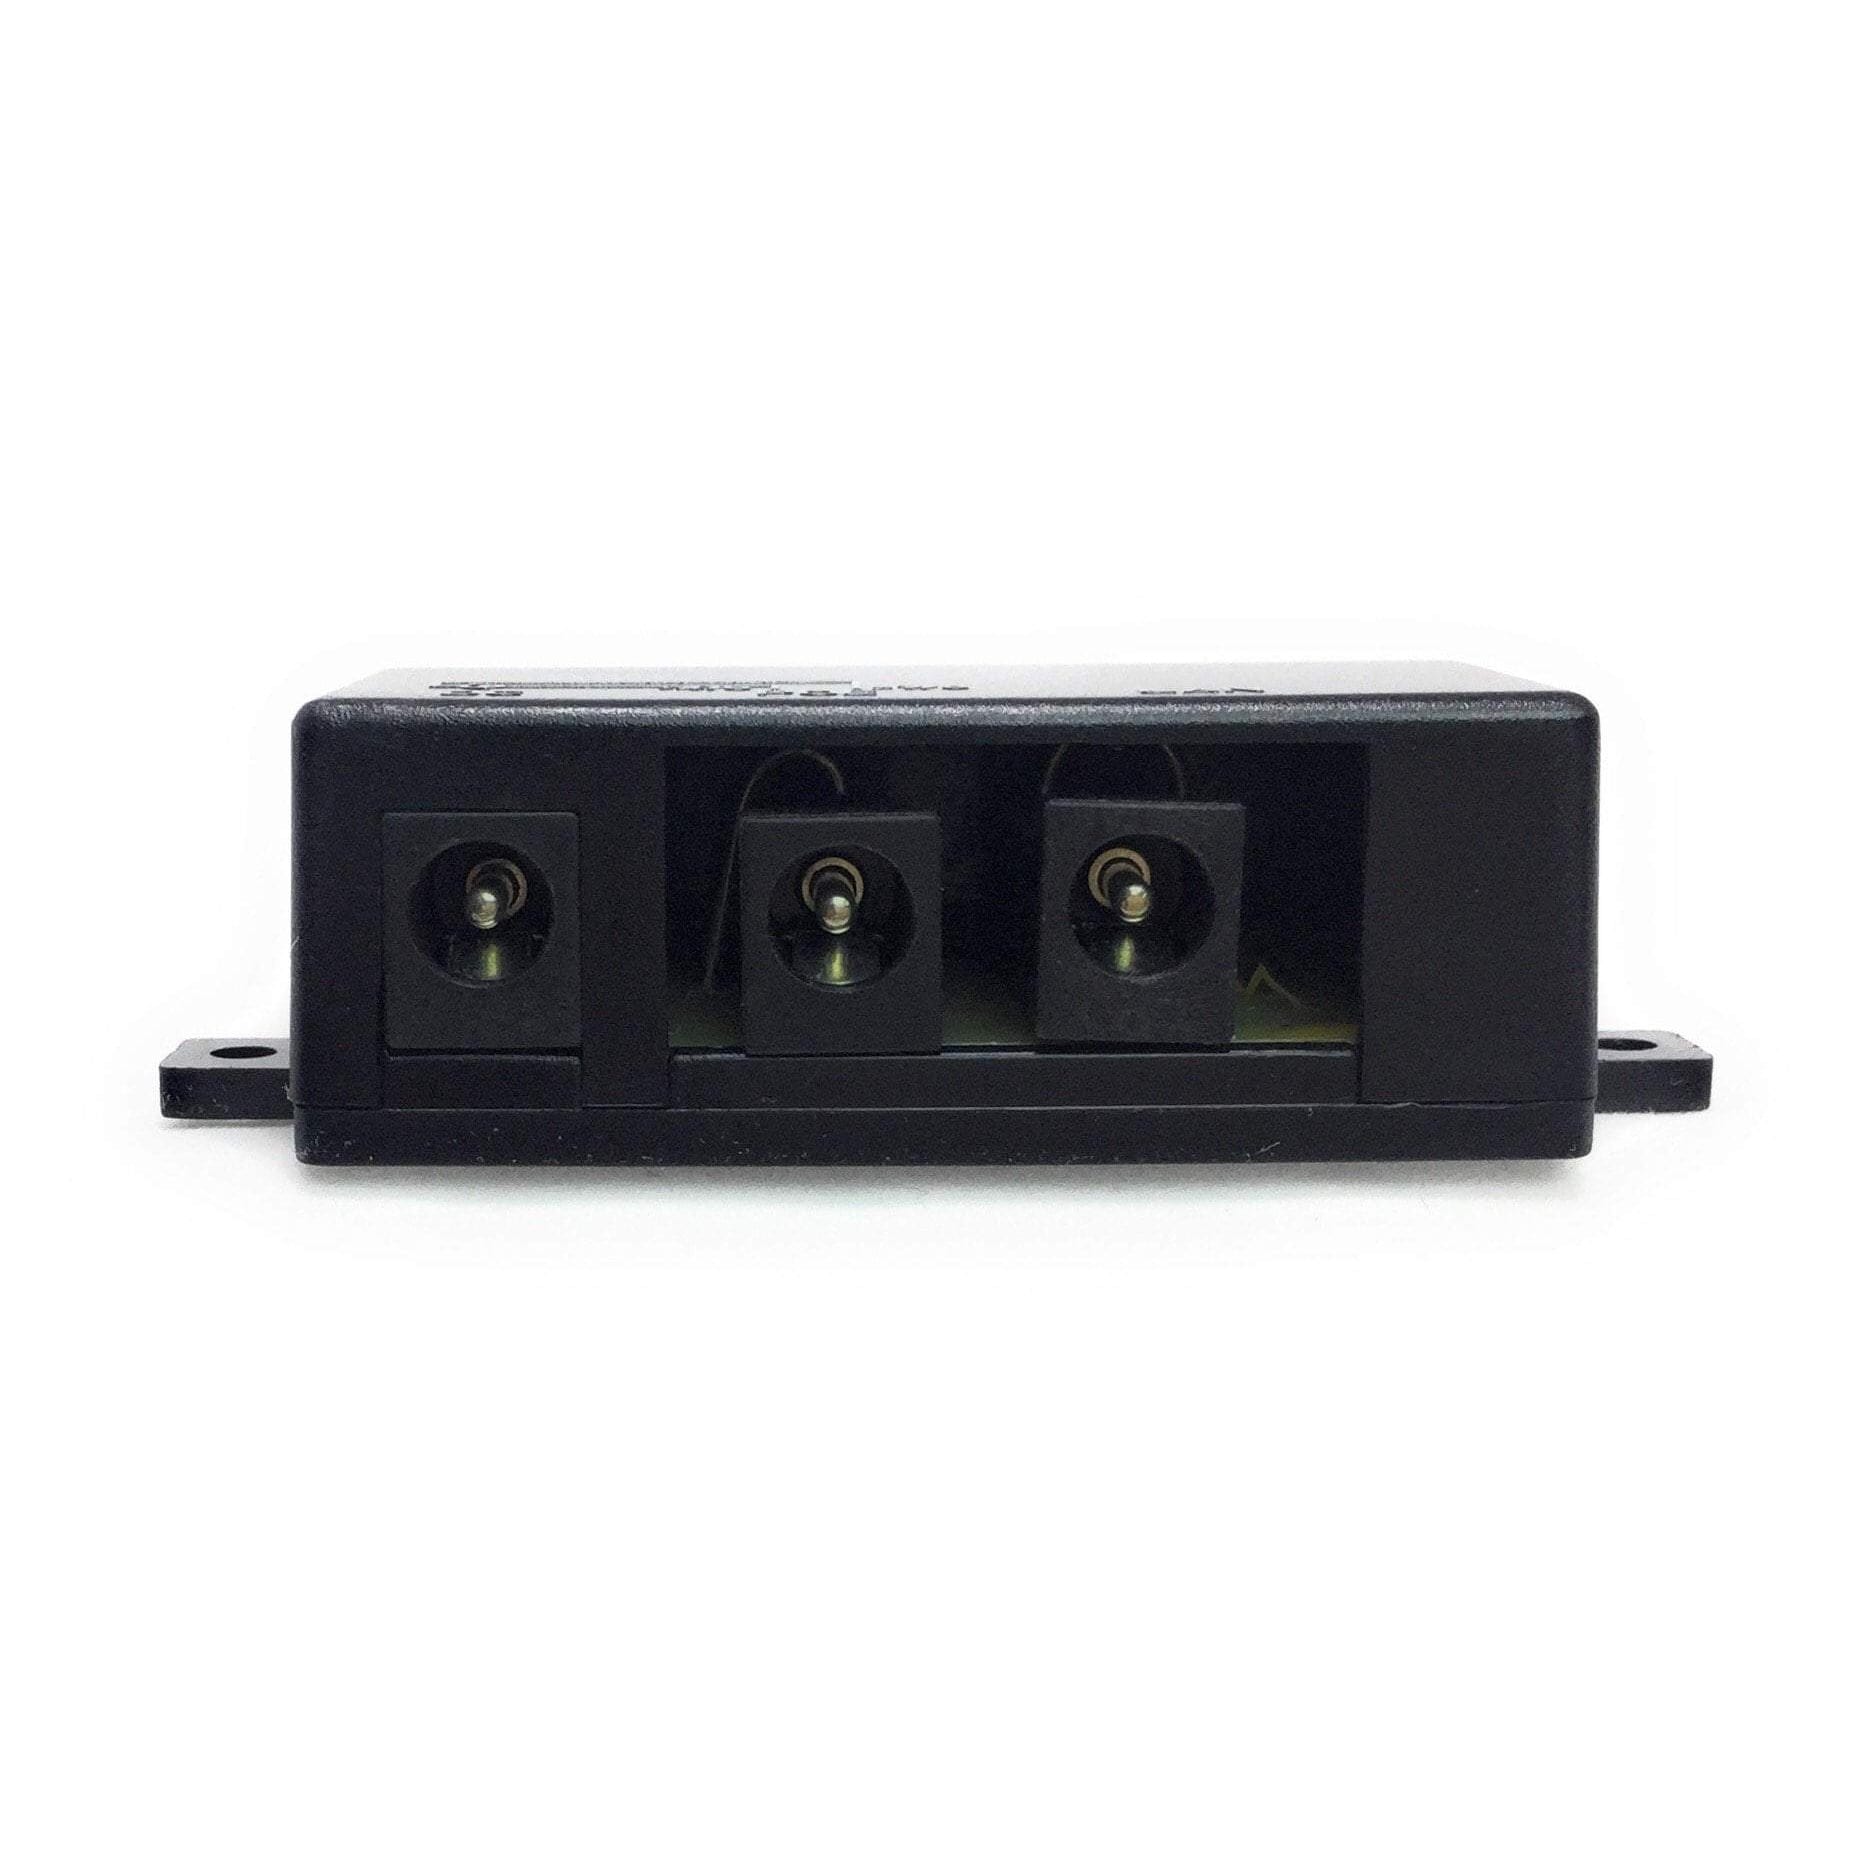 PoE Texas Accessories Dual DC Power Input for Backup Power